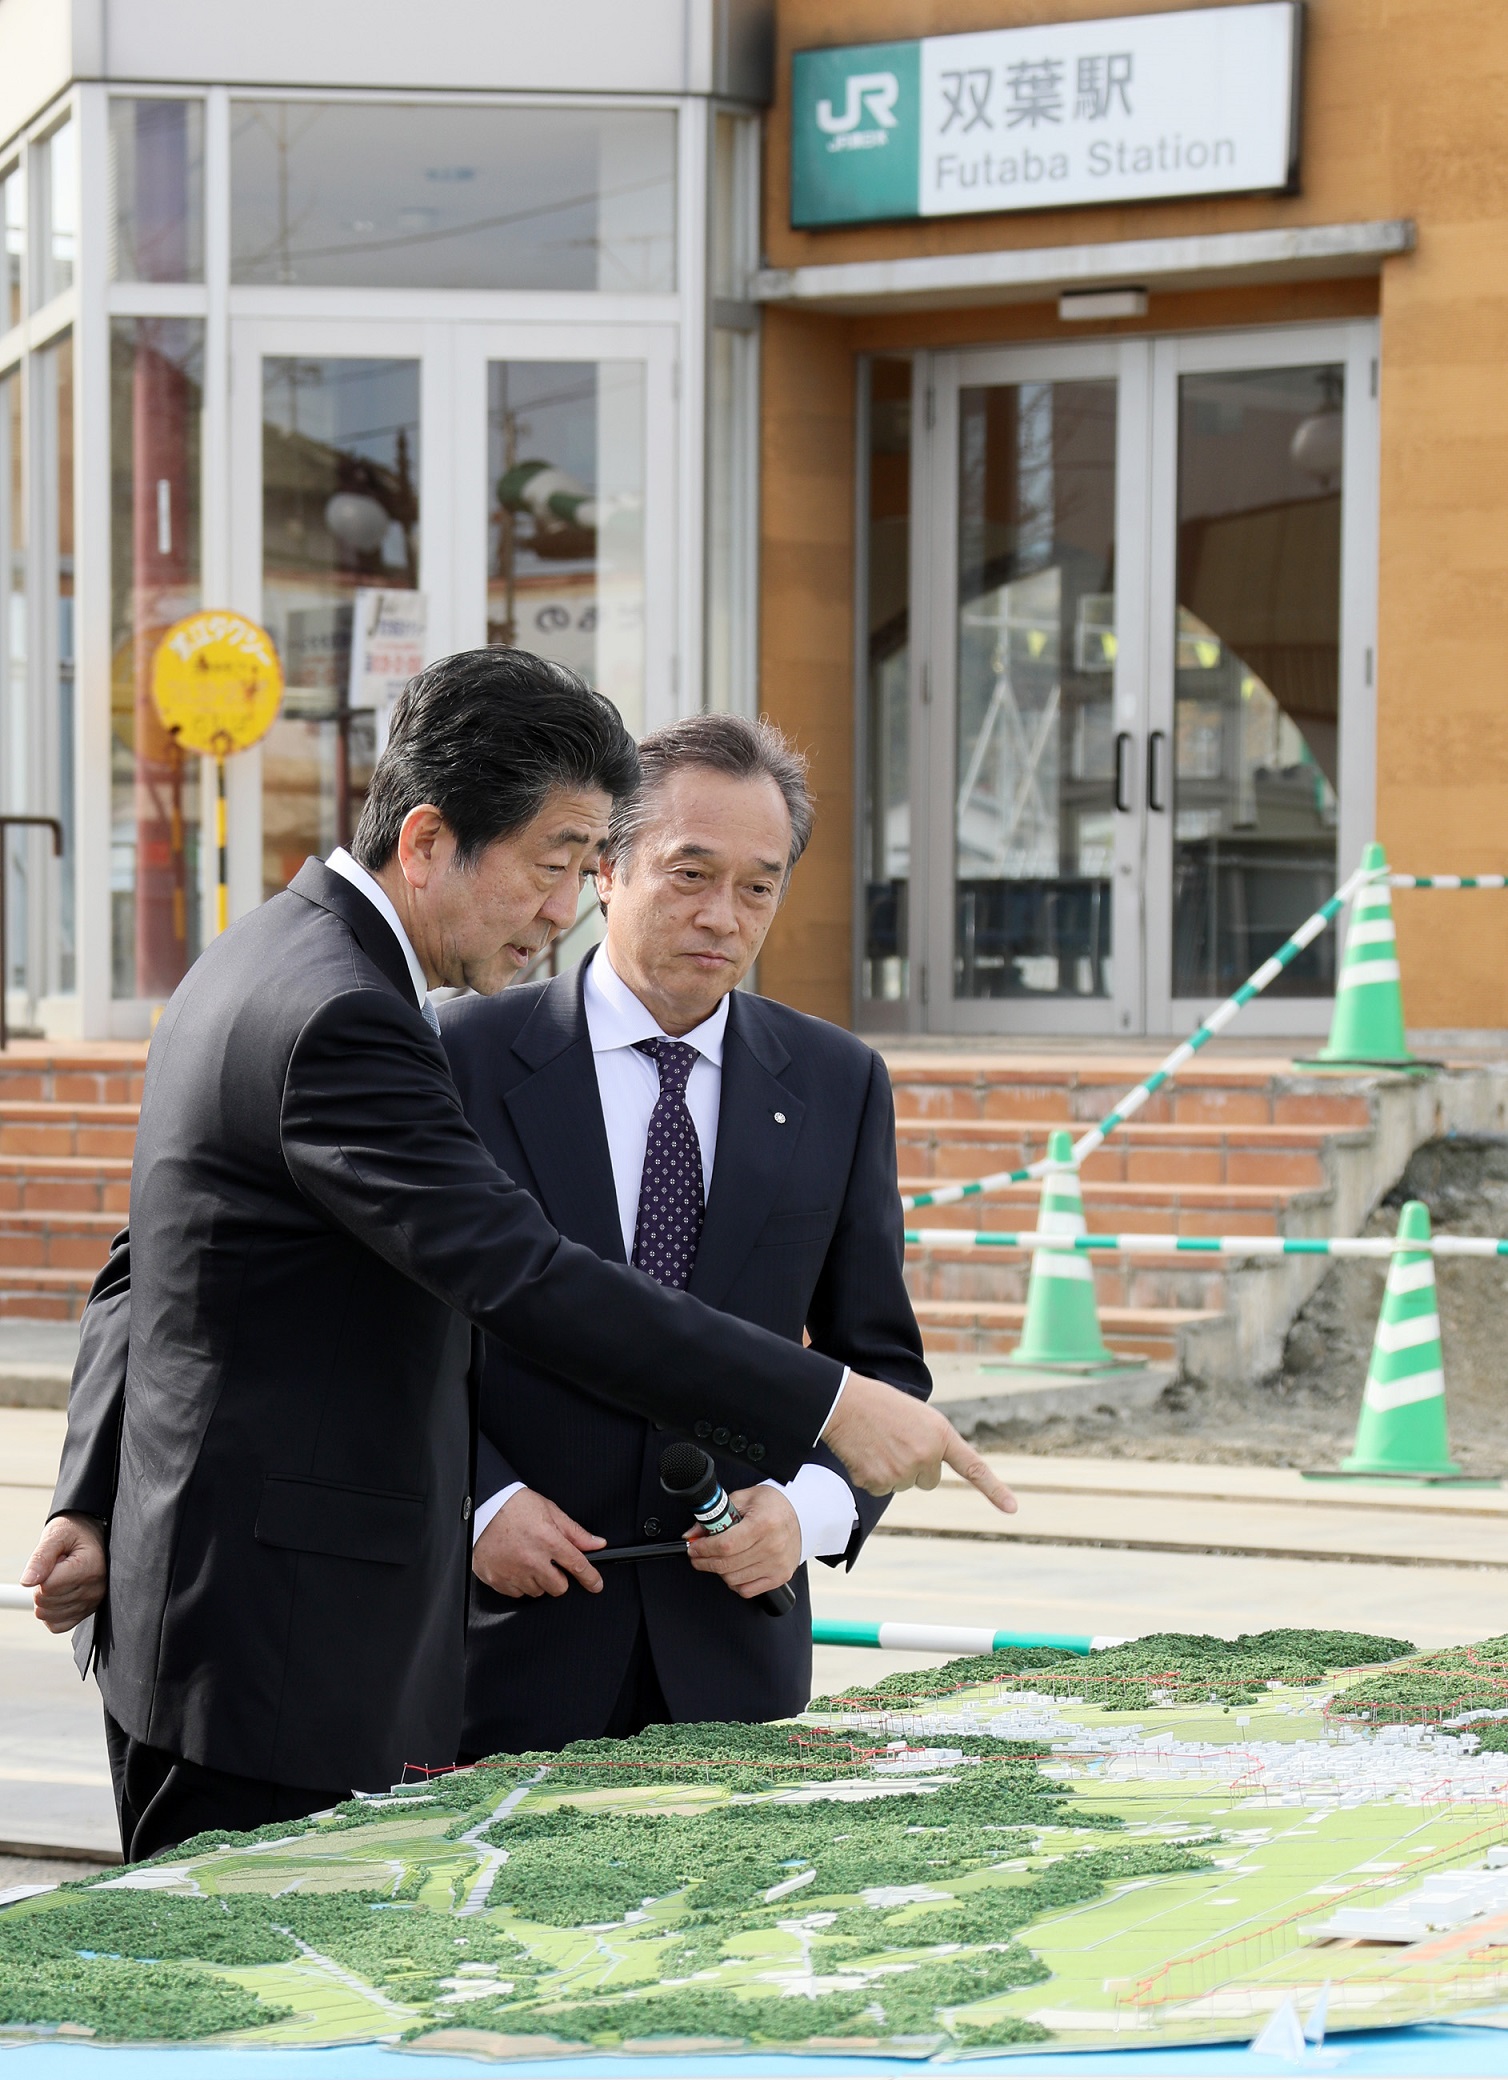 Photograph of the Prime Minister visiting the area around Futaba Station